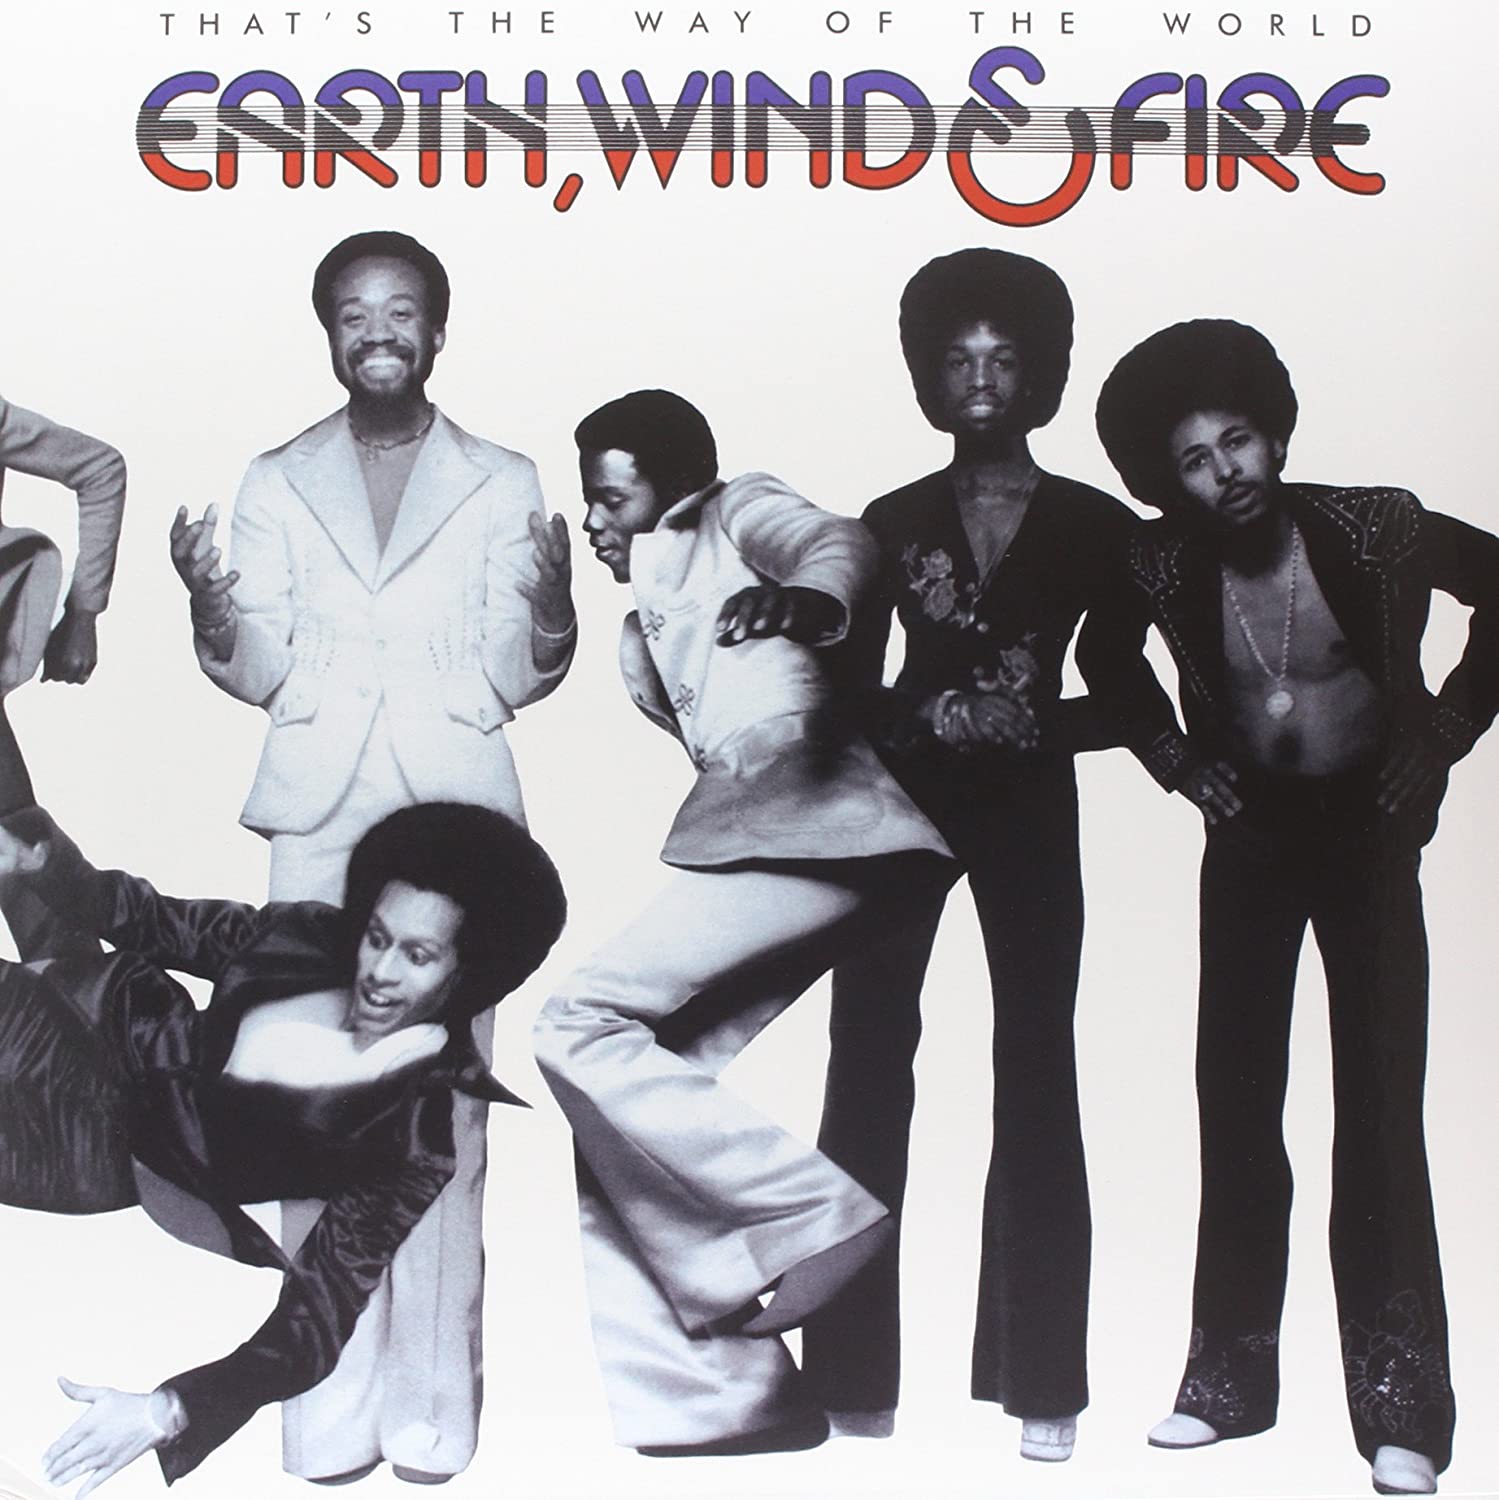 Earth Wind & Fire - That's the Way of the World (Vinyl LP)